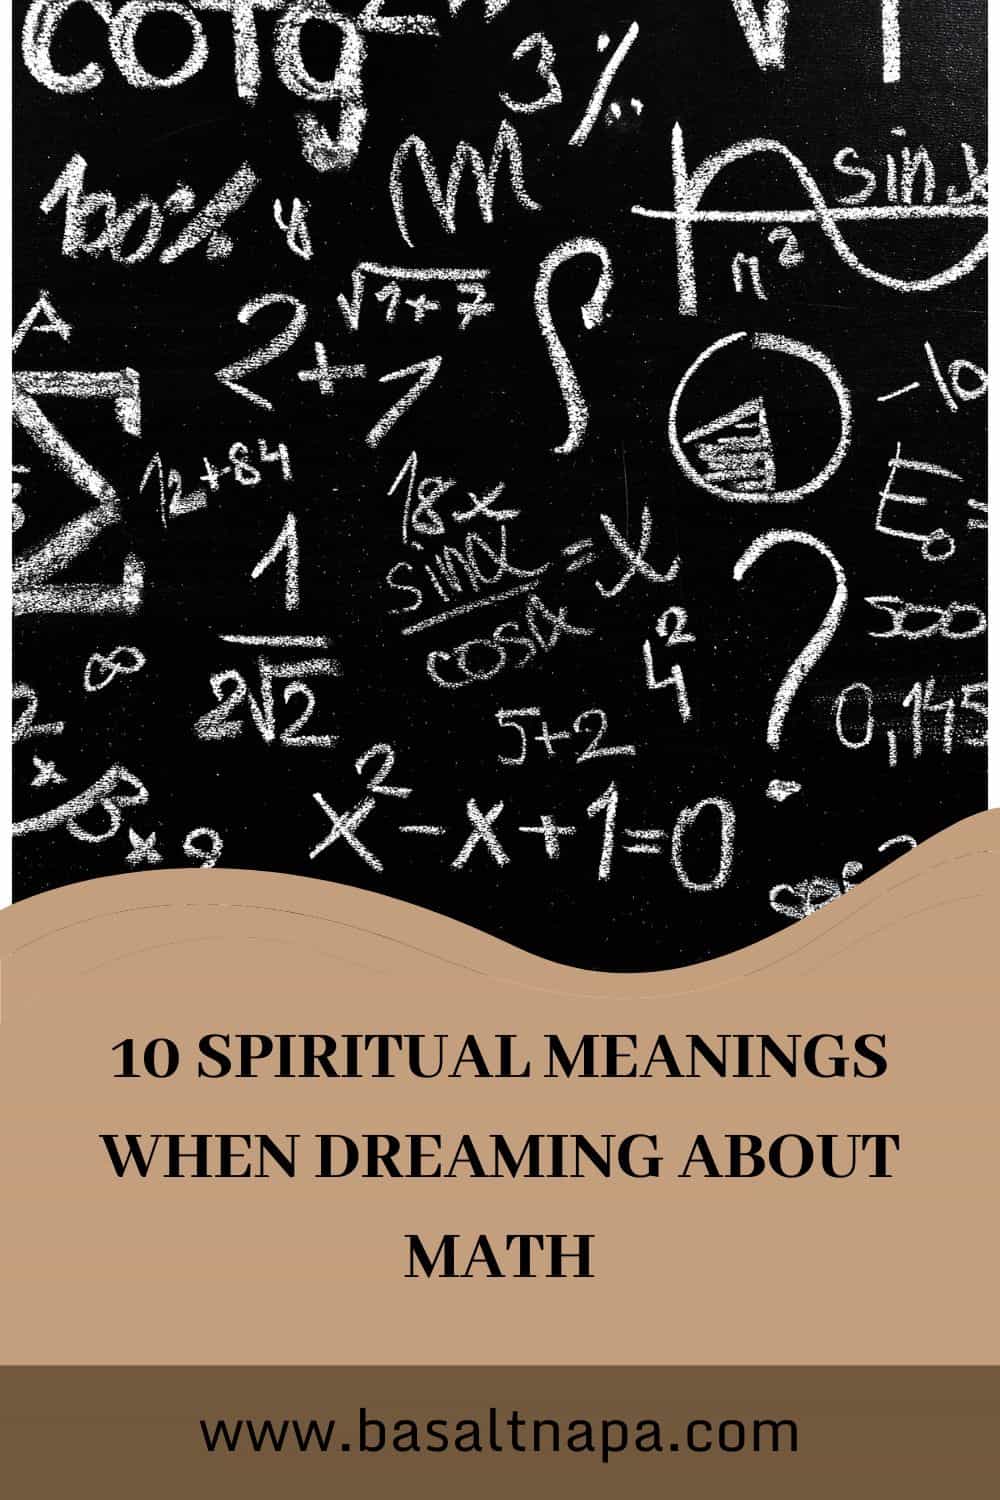 10 Meanings of dreaming about math